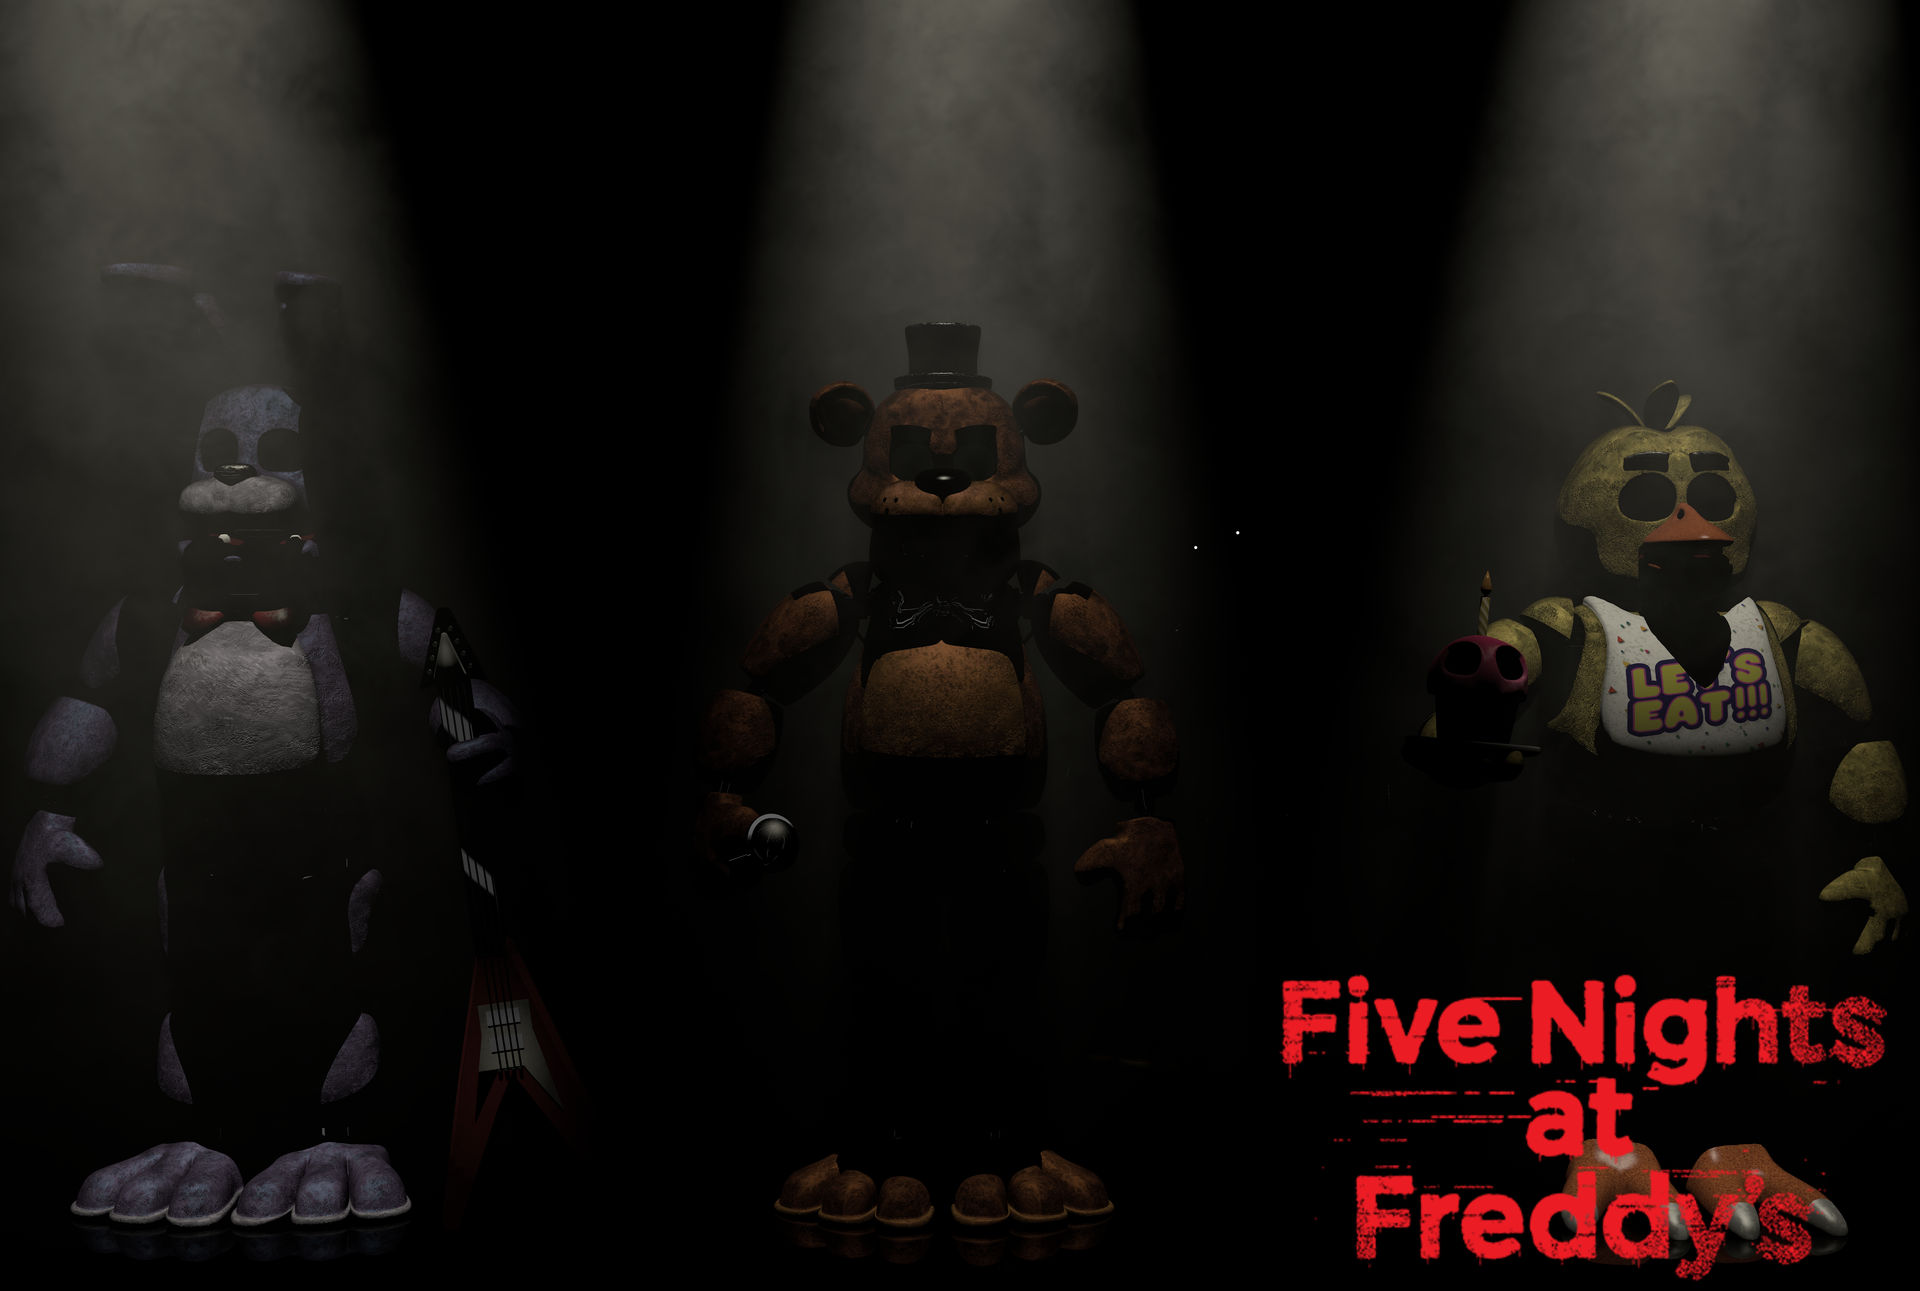 FNaF 3 Wallpaper by Lord-Kaine on DeviantArt